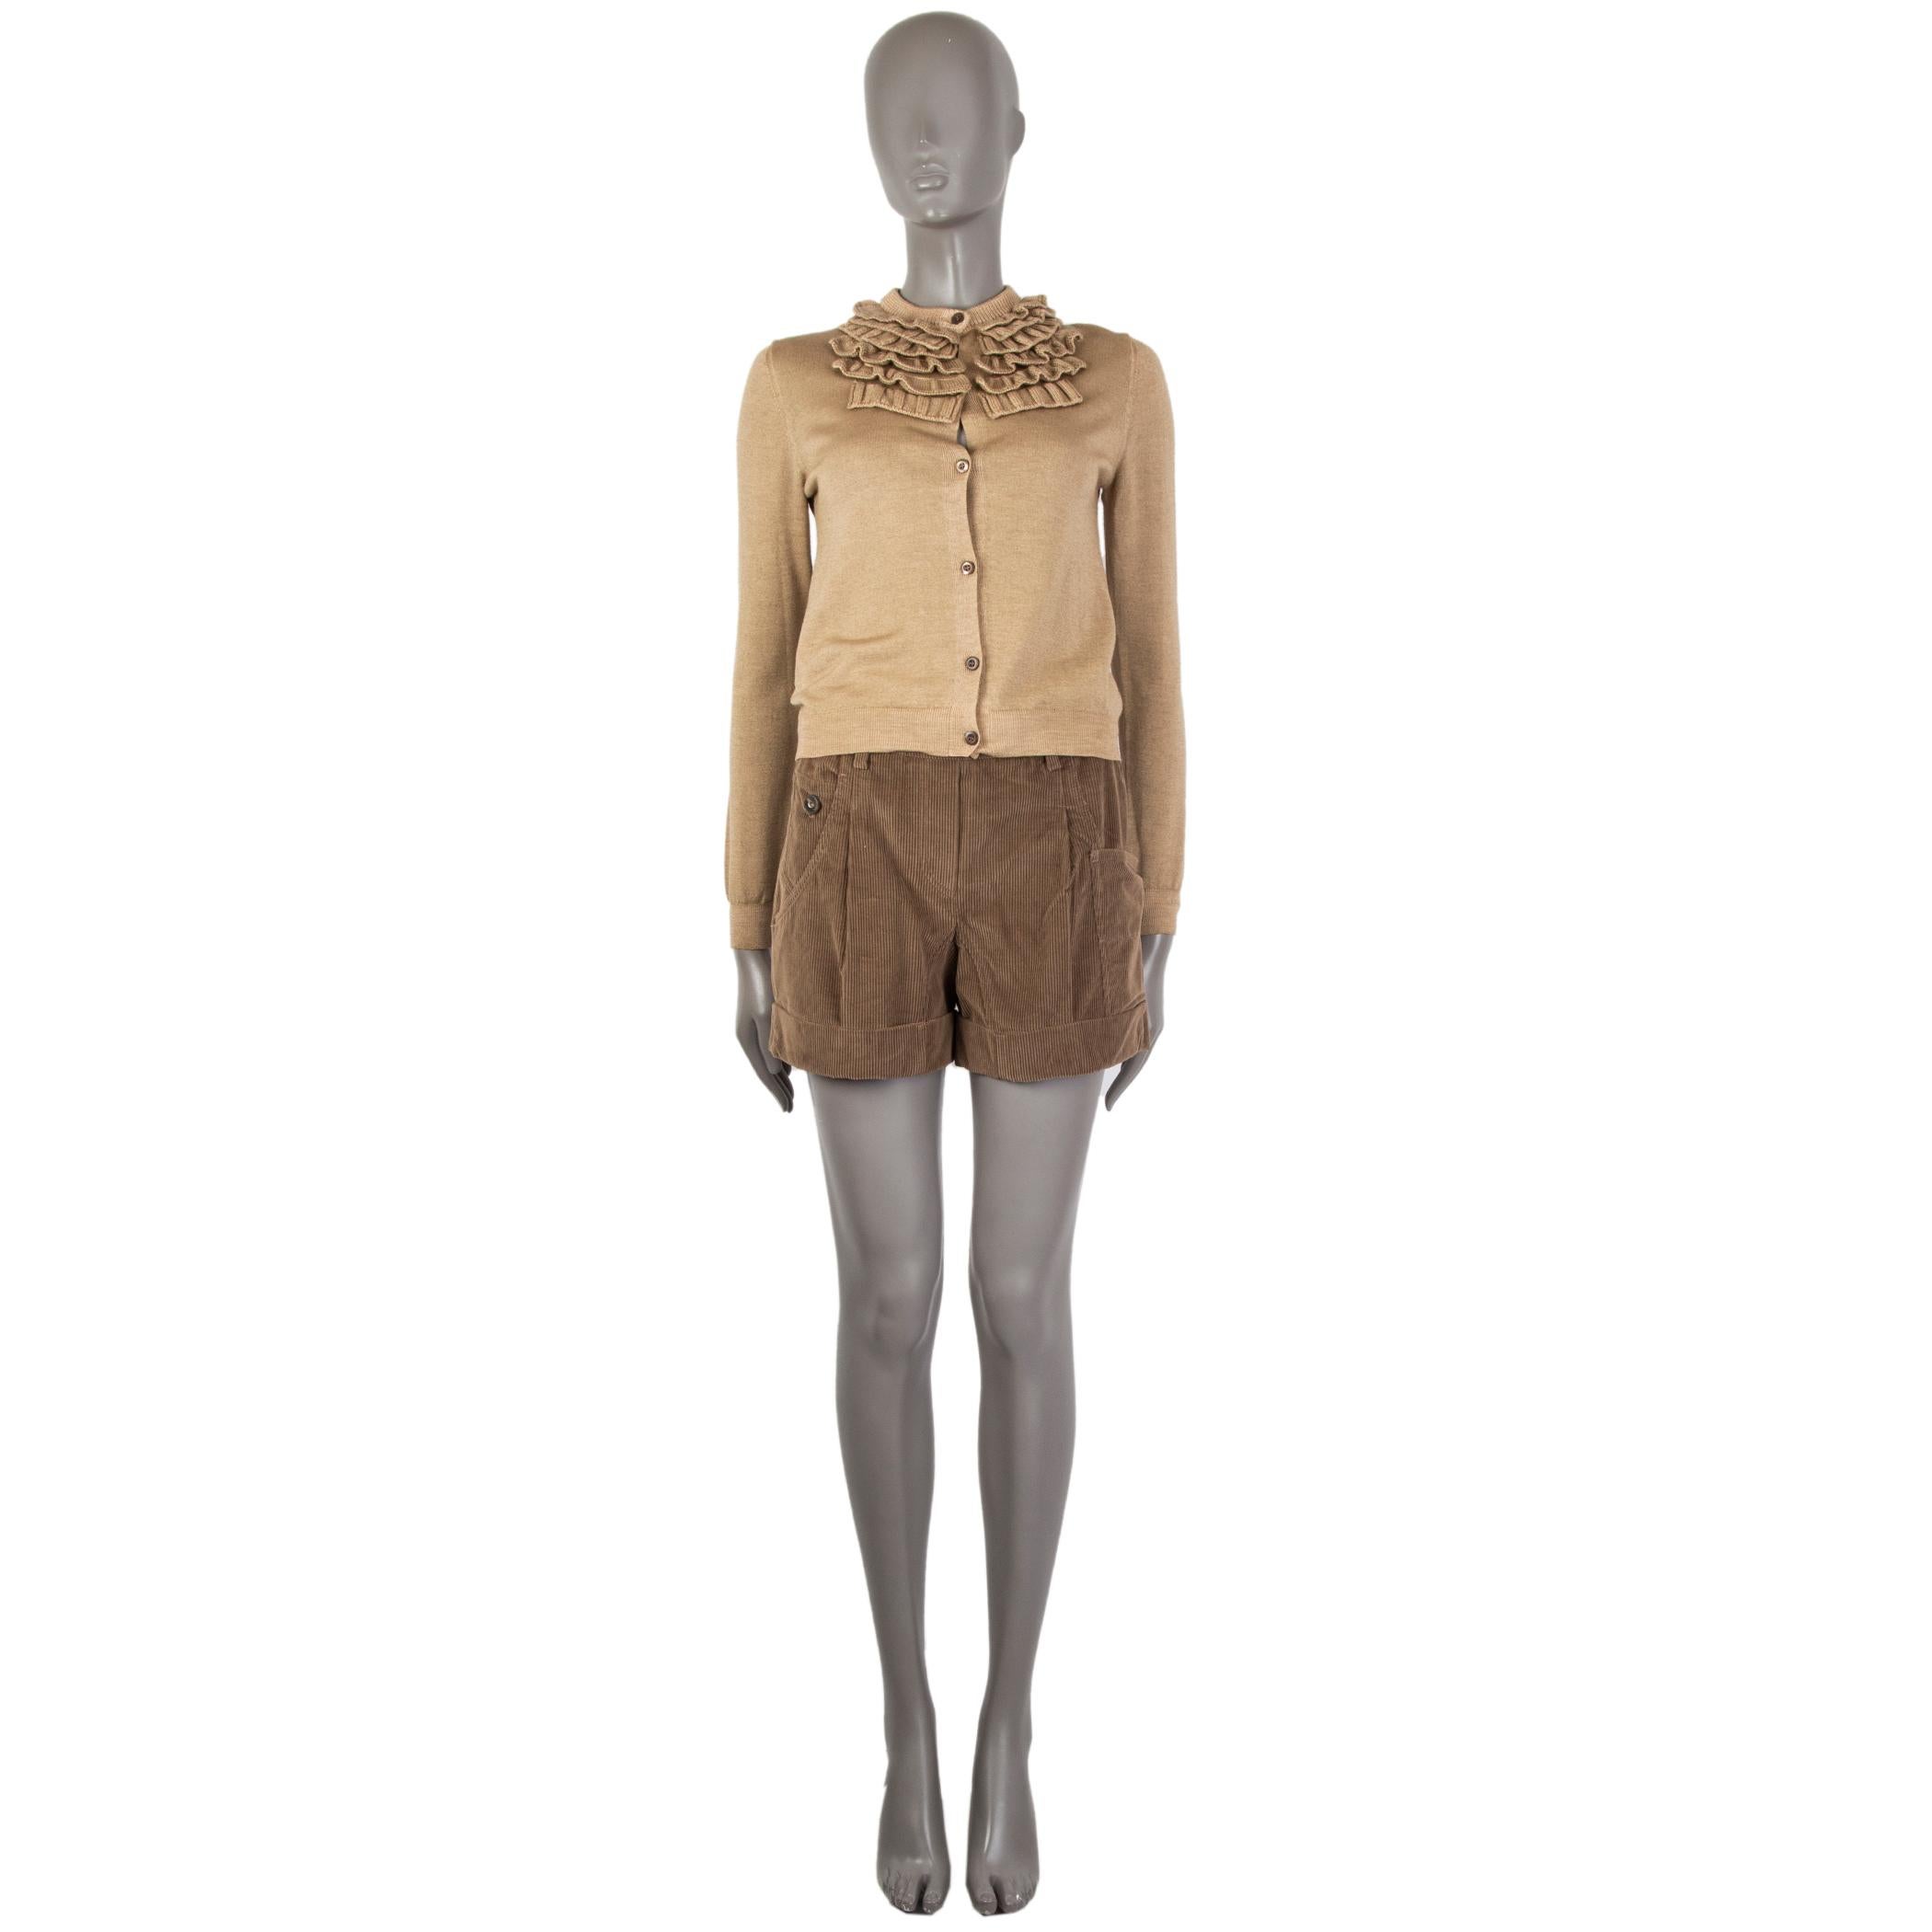 100% authentic Prada short cardigan in tan wool (70%) and silk (30%). With crew neck and ruffled details. Closes with fawn buttons on the front. Has been worn and is in excellent condition. 

Measurements
Tag Size	40
Size	S
Shoulder Width	36cm